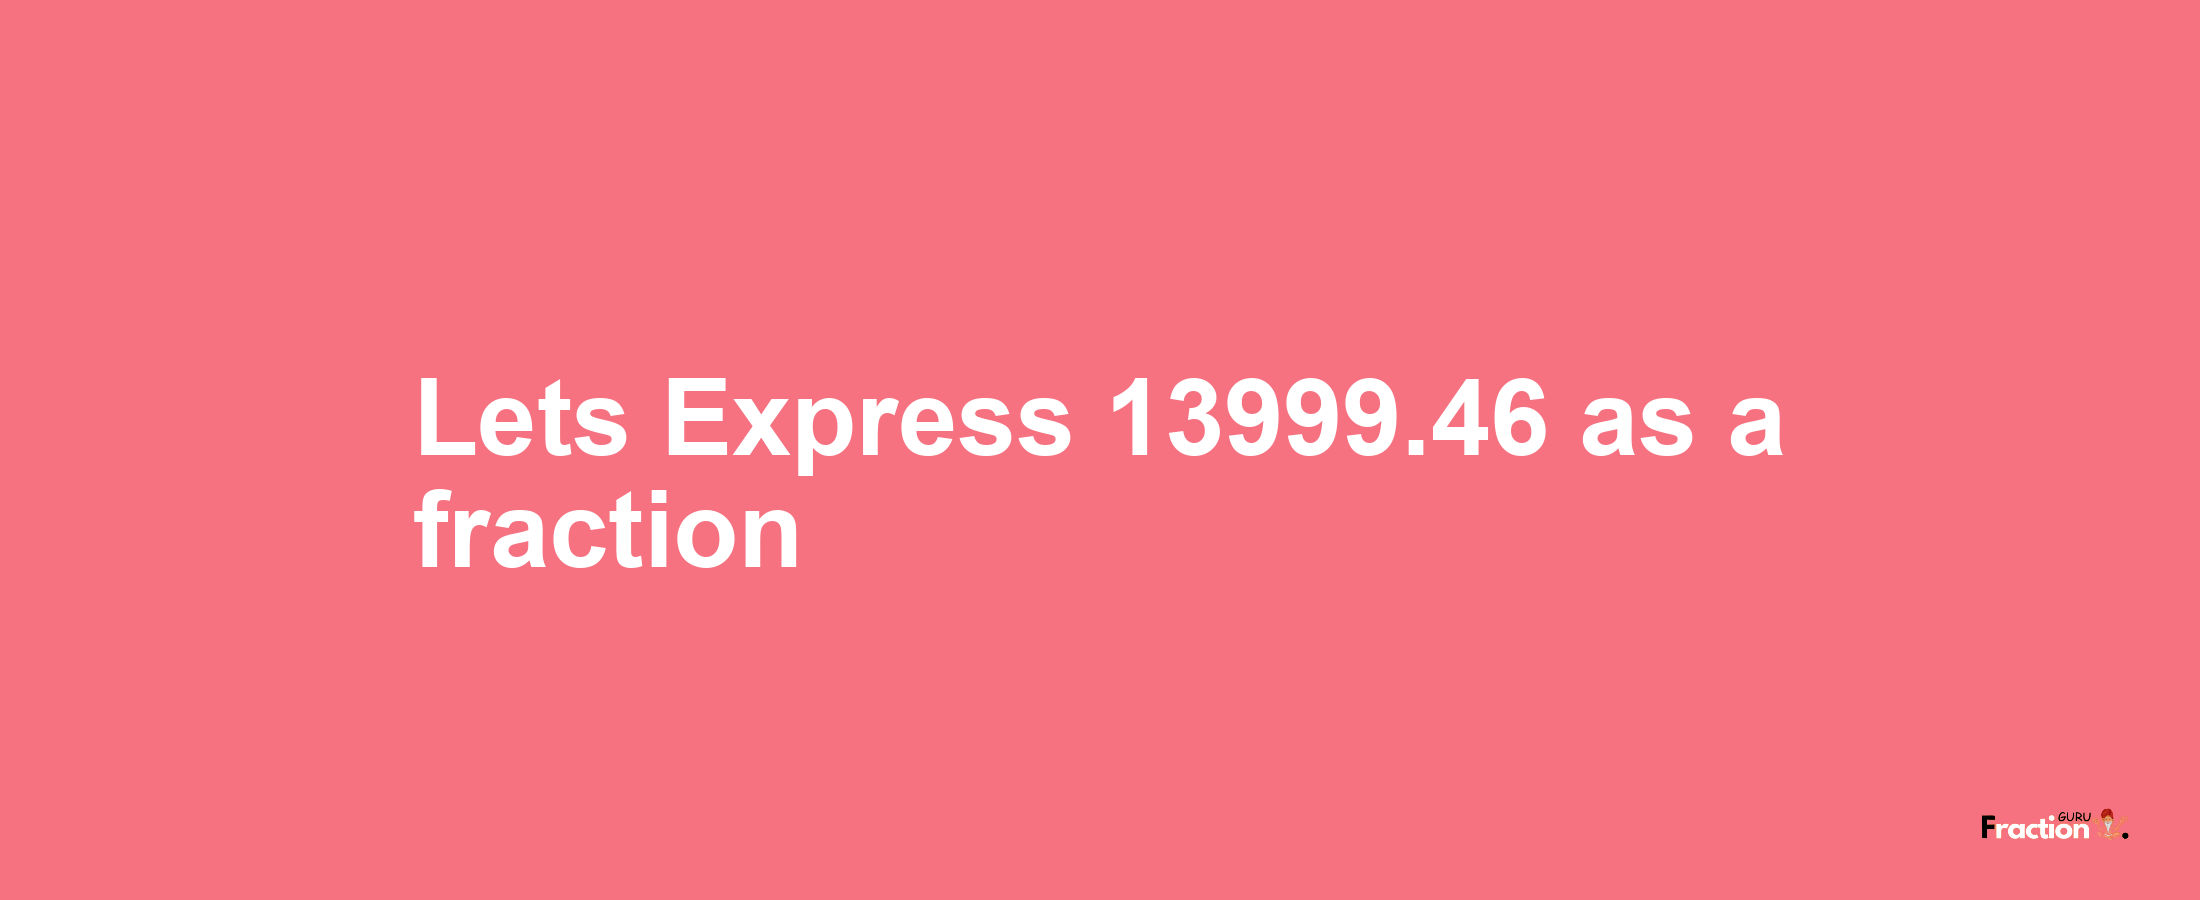 Lets Express 13999.46 as afraction